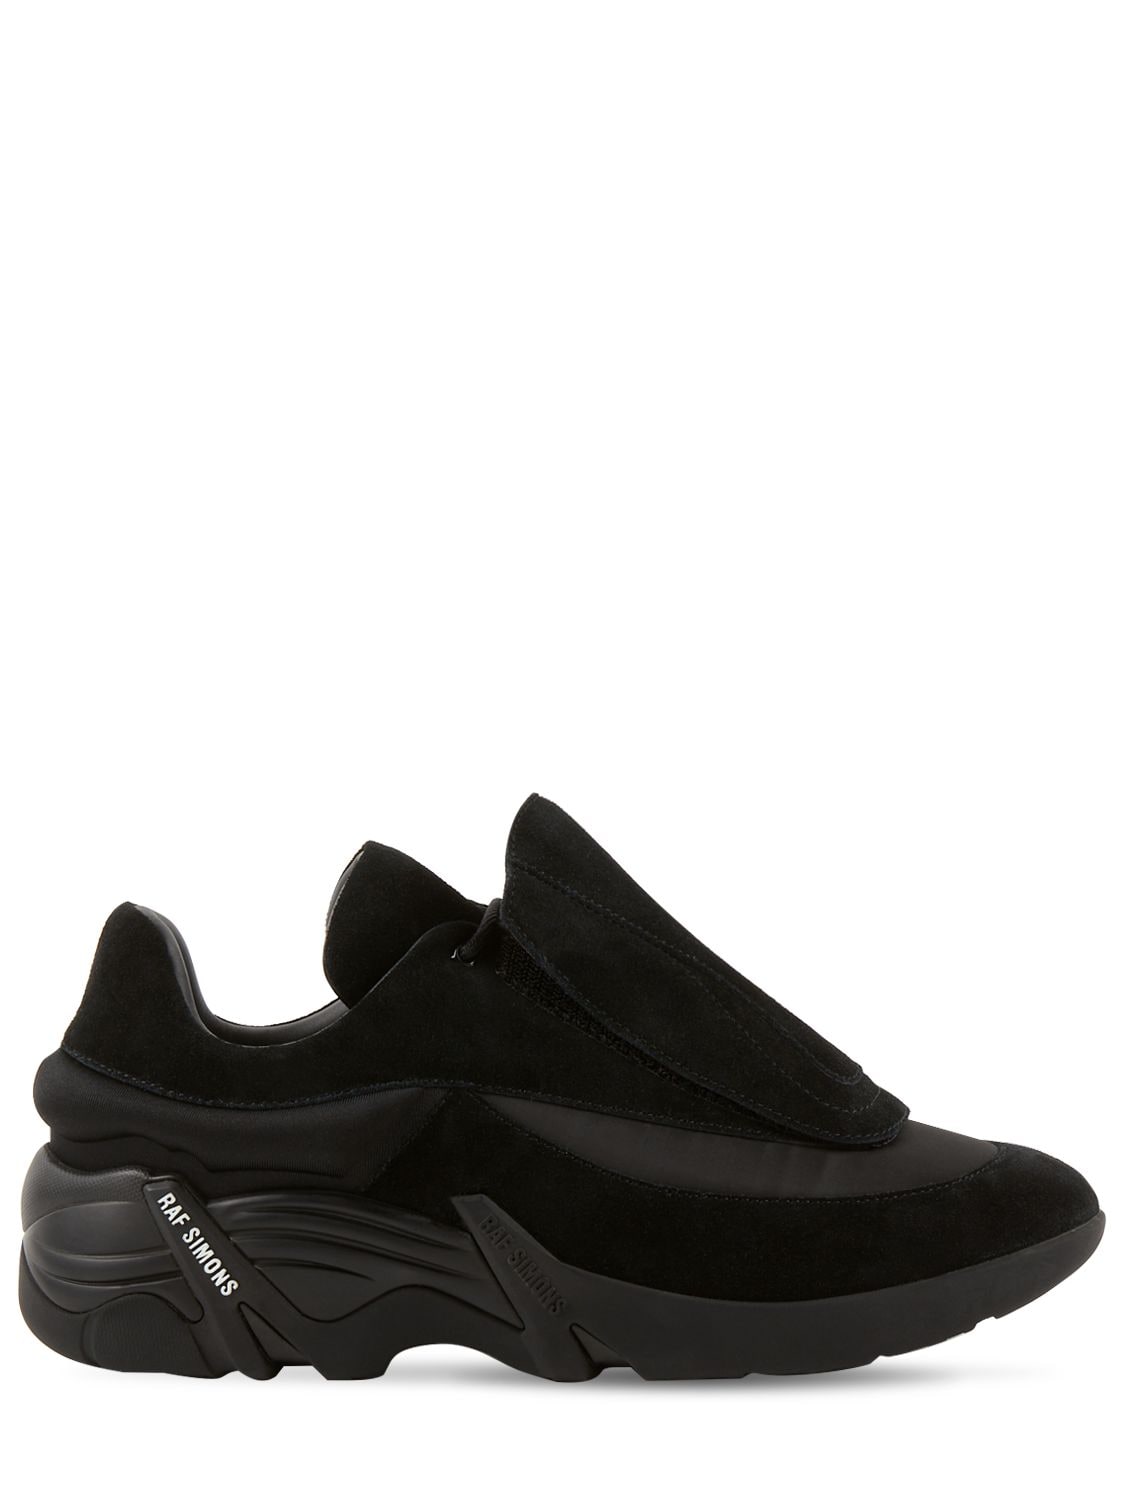 Antei Suede & Leather Low-top Sneakers